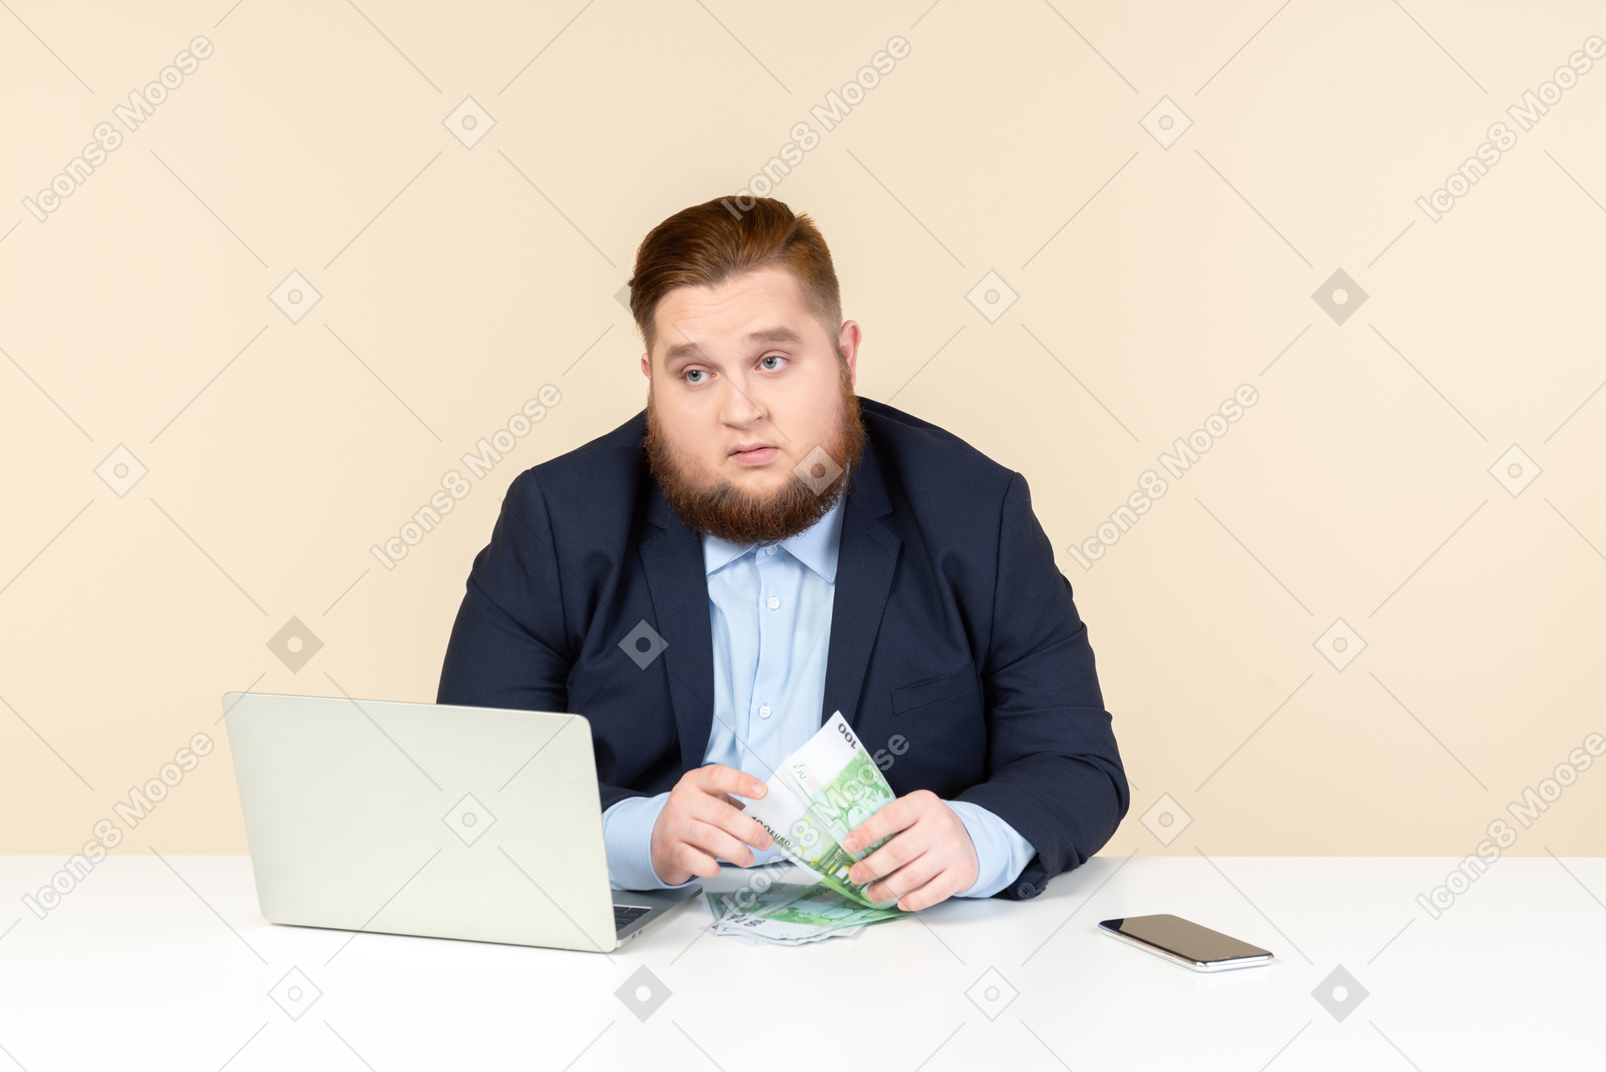 Young overweight office worker sitting at the desk and counting money